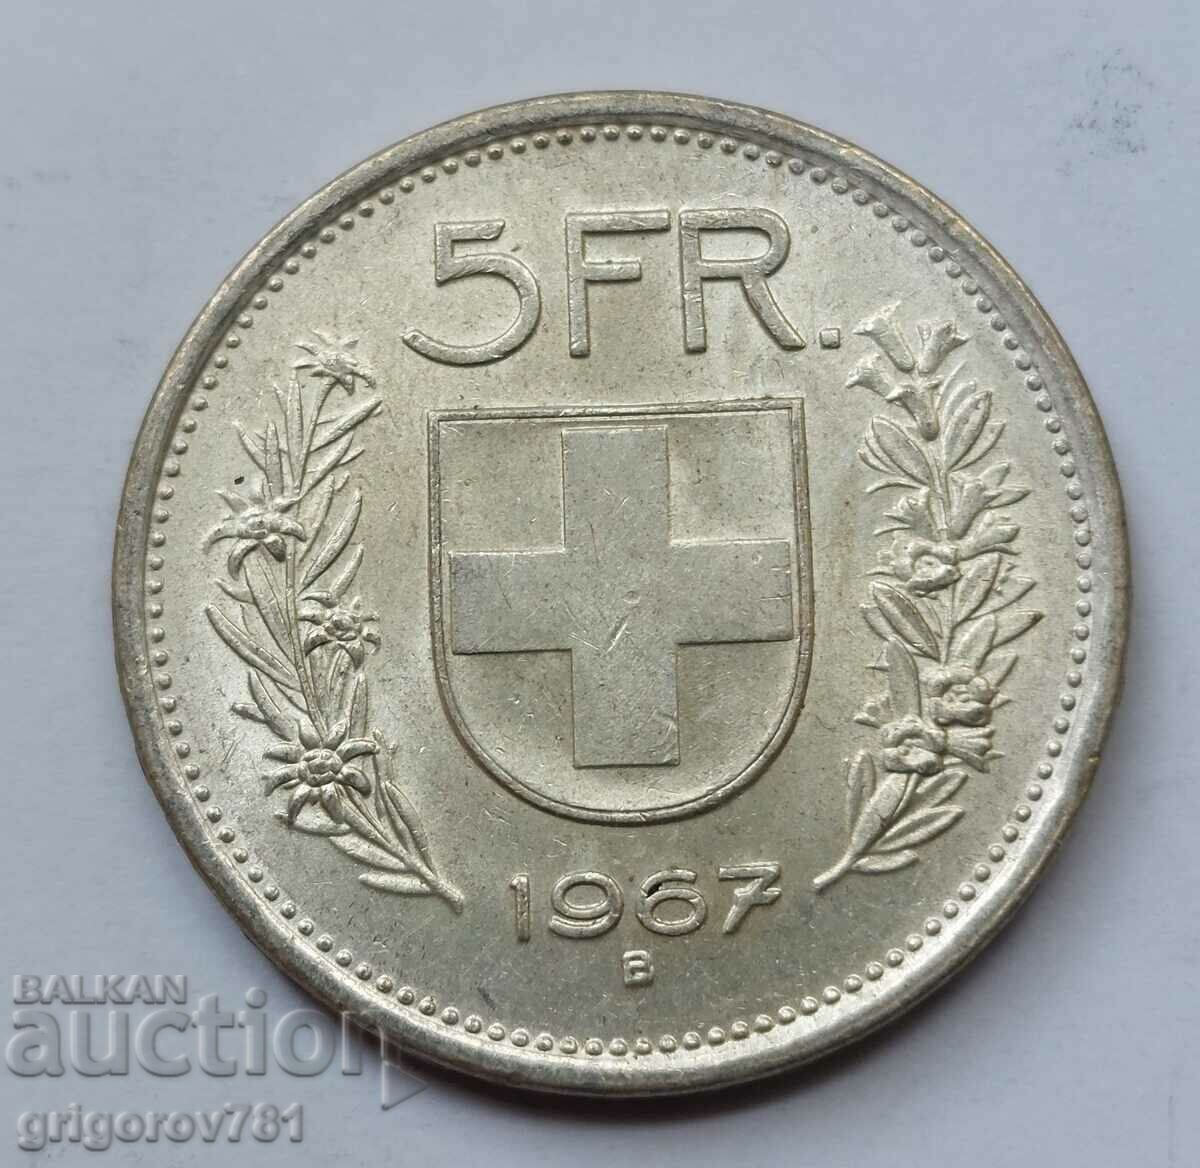 5 Francs Silver Switzerland 1967 B - Silver Coin #14